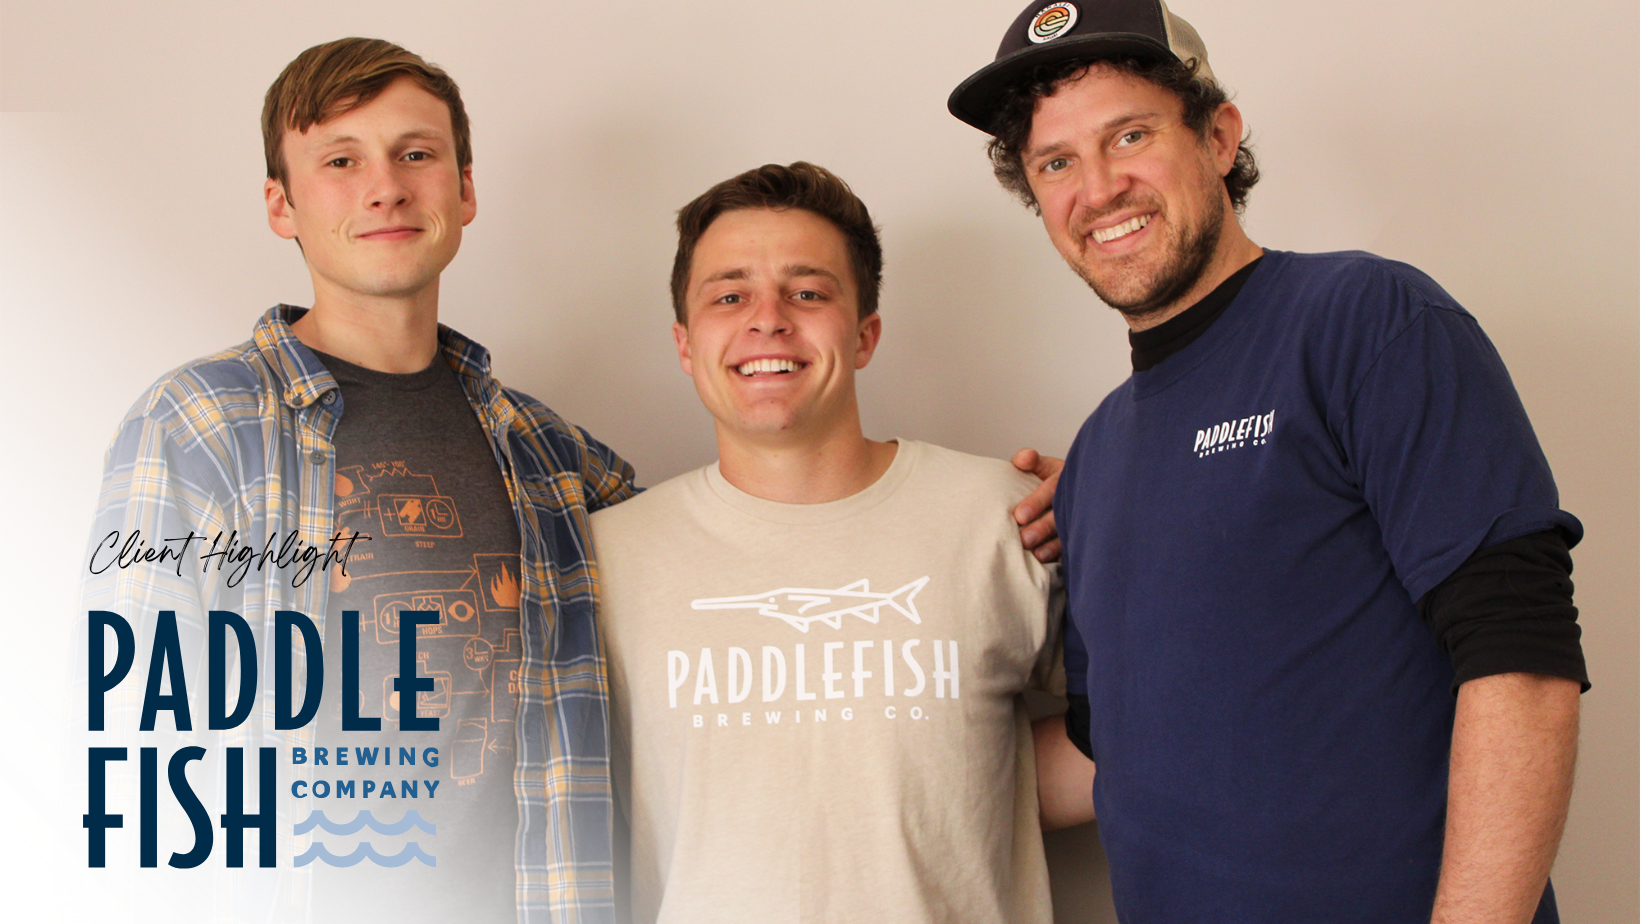 The three owners of Paddlefish Brewing posing for a picture